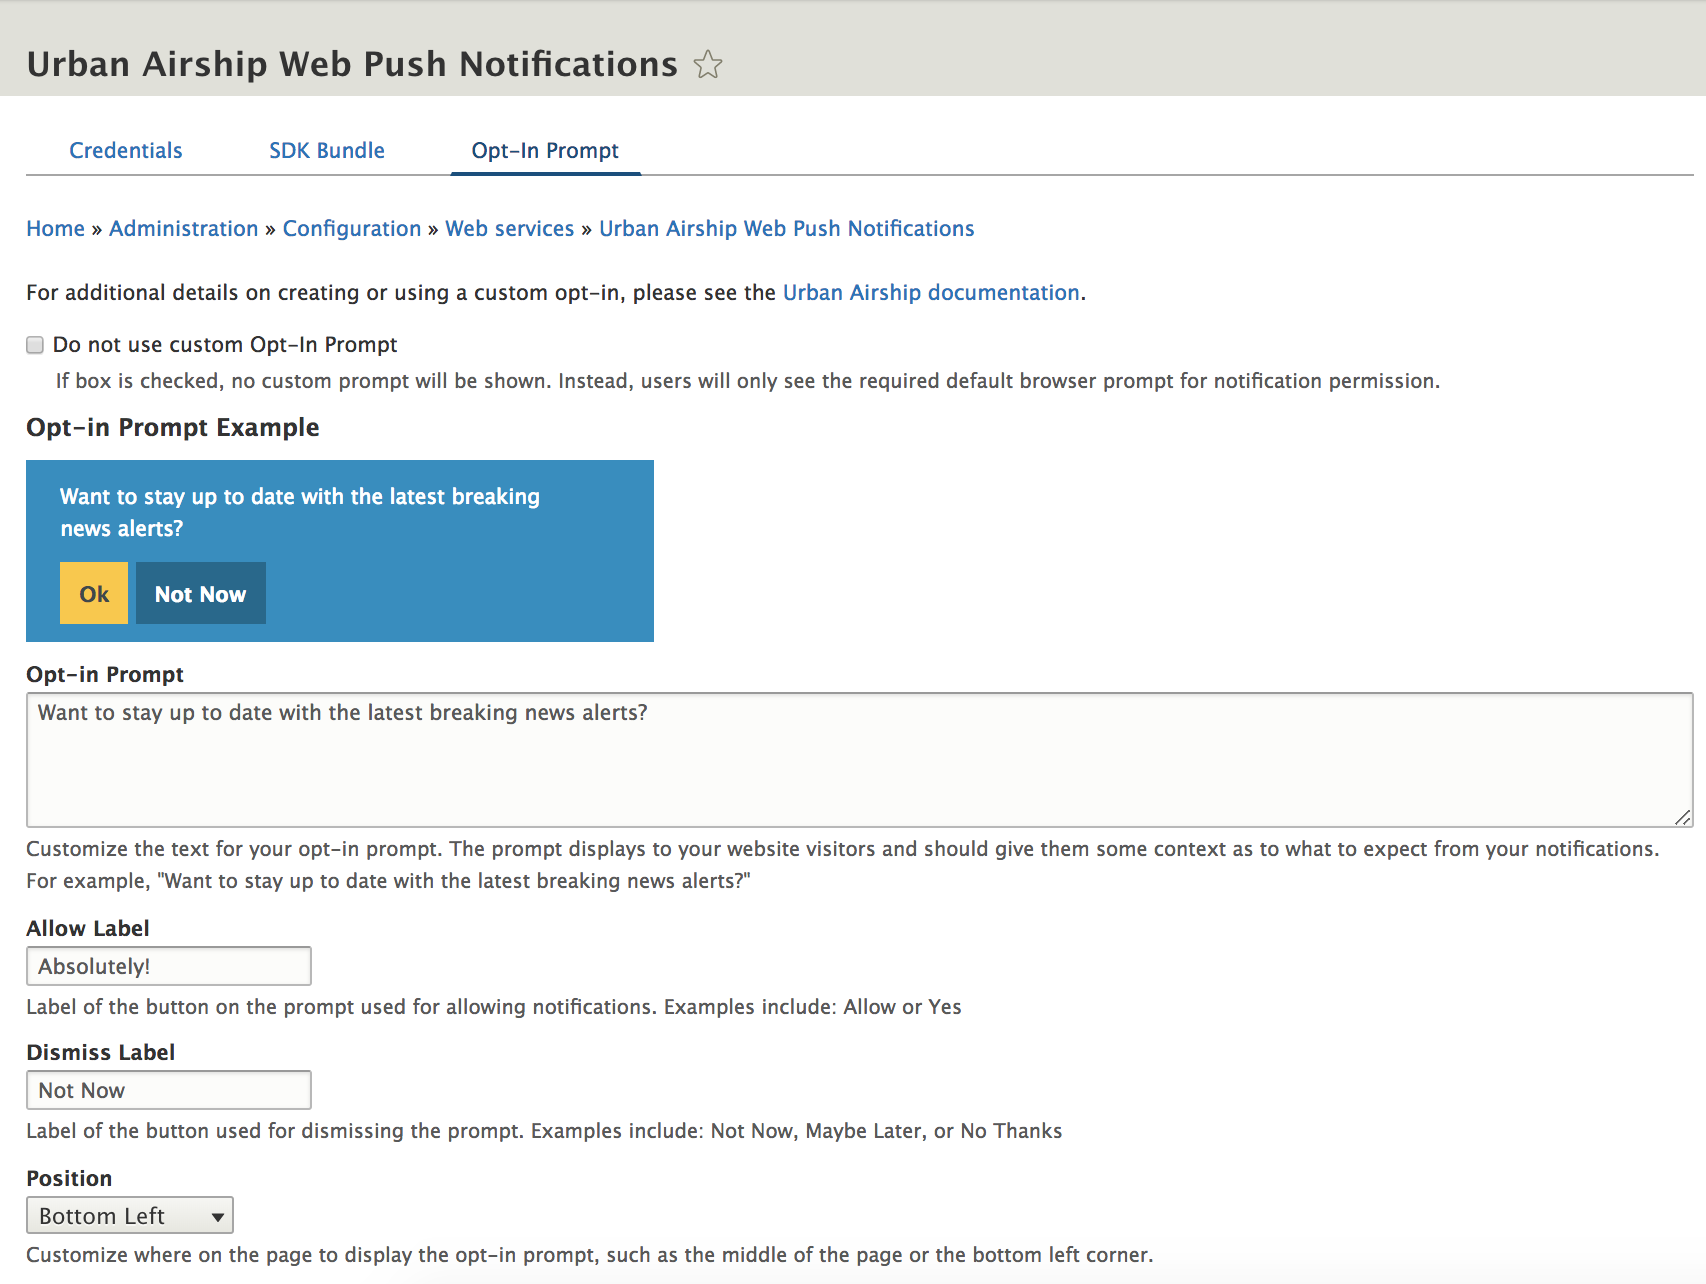 drupal-opt-in-prompt-settings-urban-airship-web-notifications.png